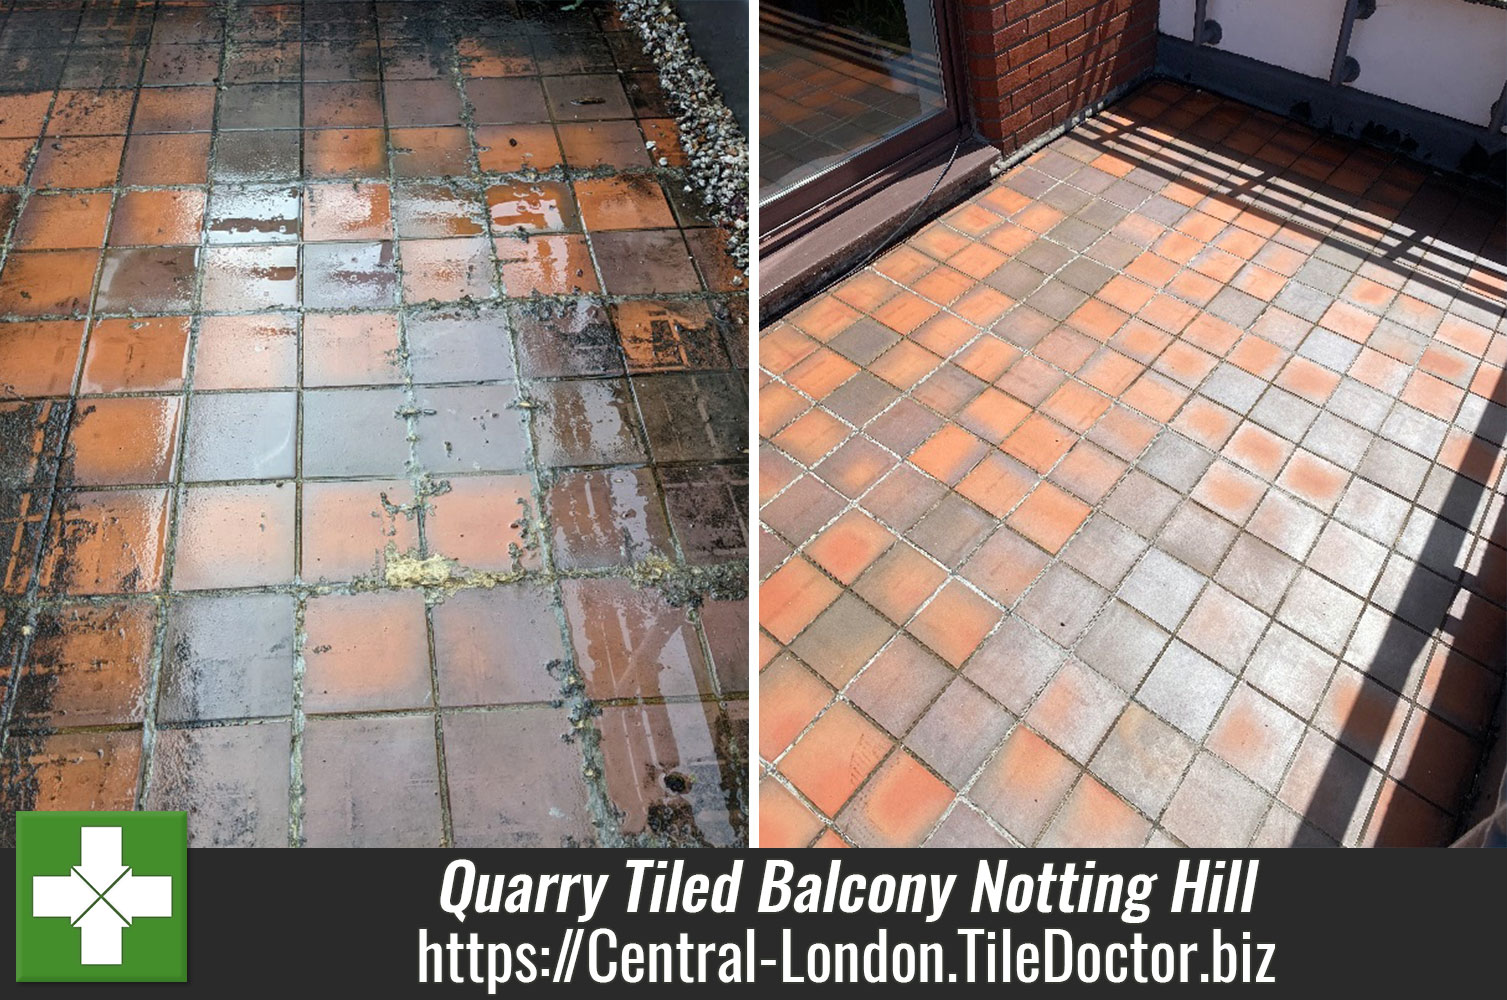 Tile Doctor Acid Gel used to remove Limescale on a Quarry Tiled Patio in Central London